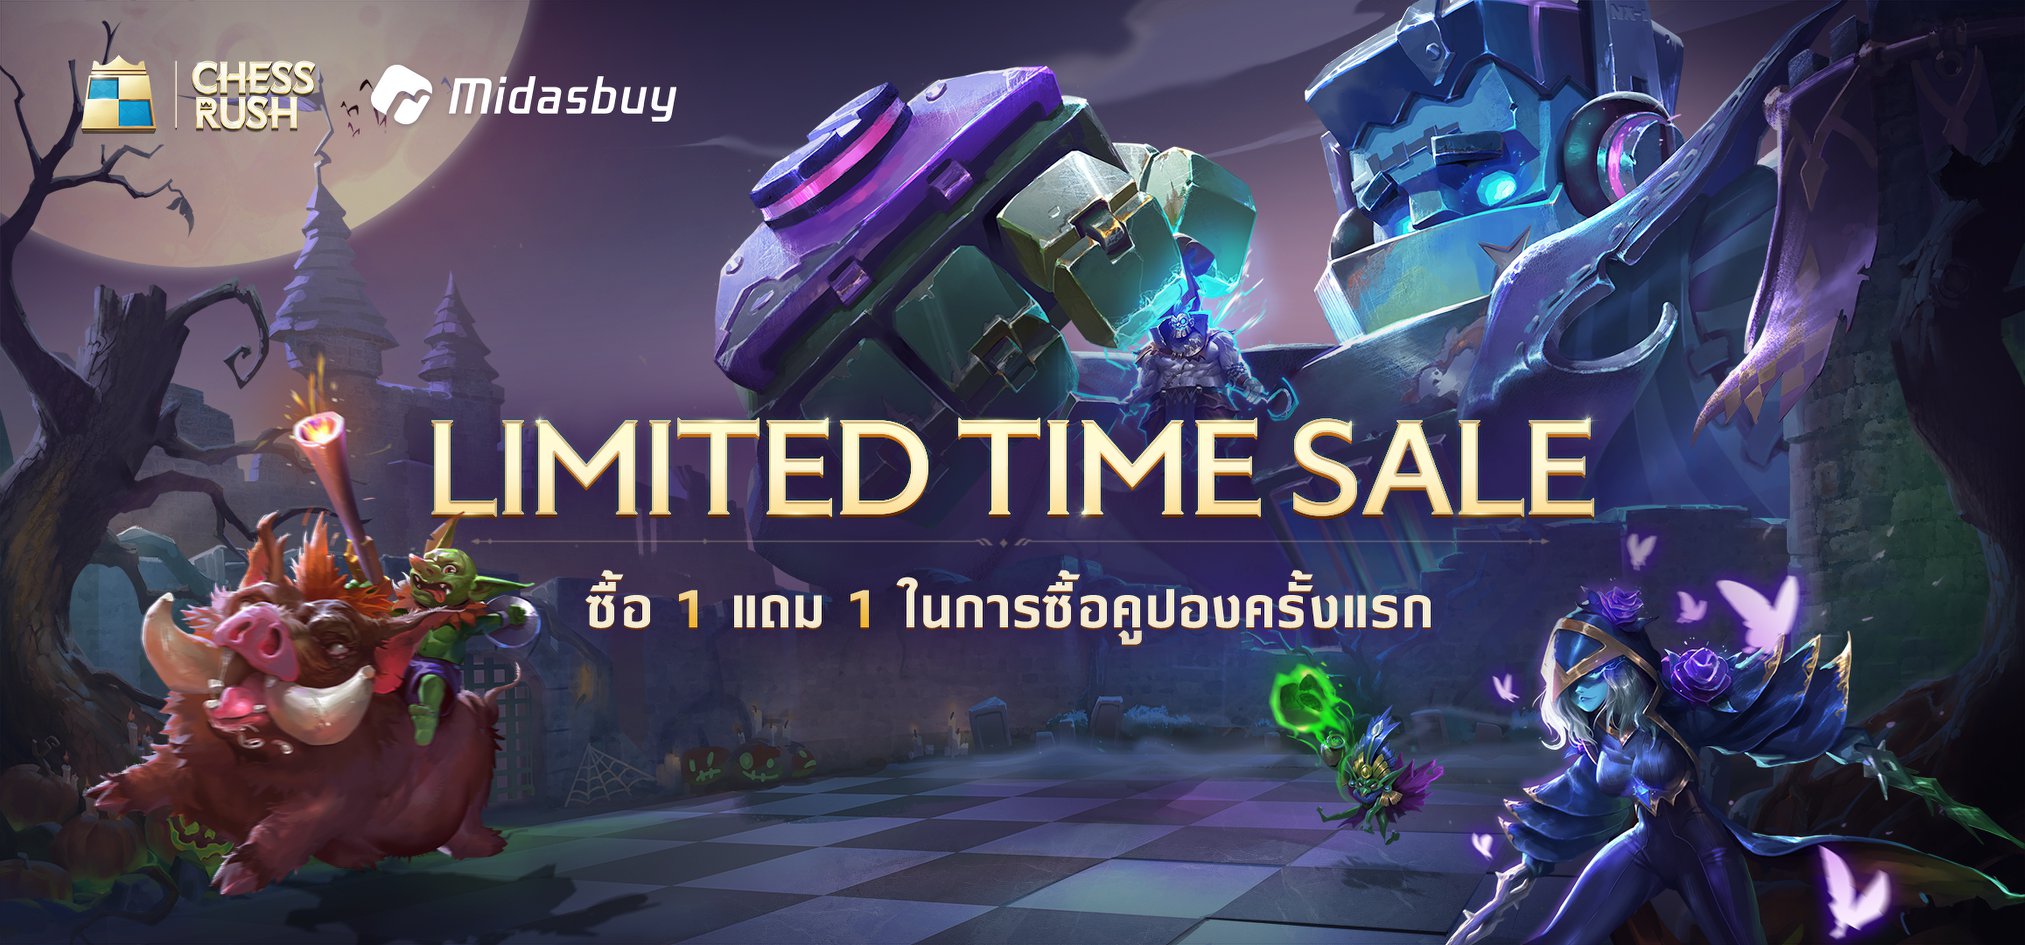 Chess Rush adds Midasbuy in Indonesia and Thailand!